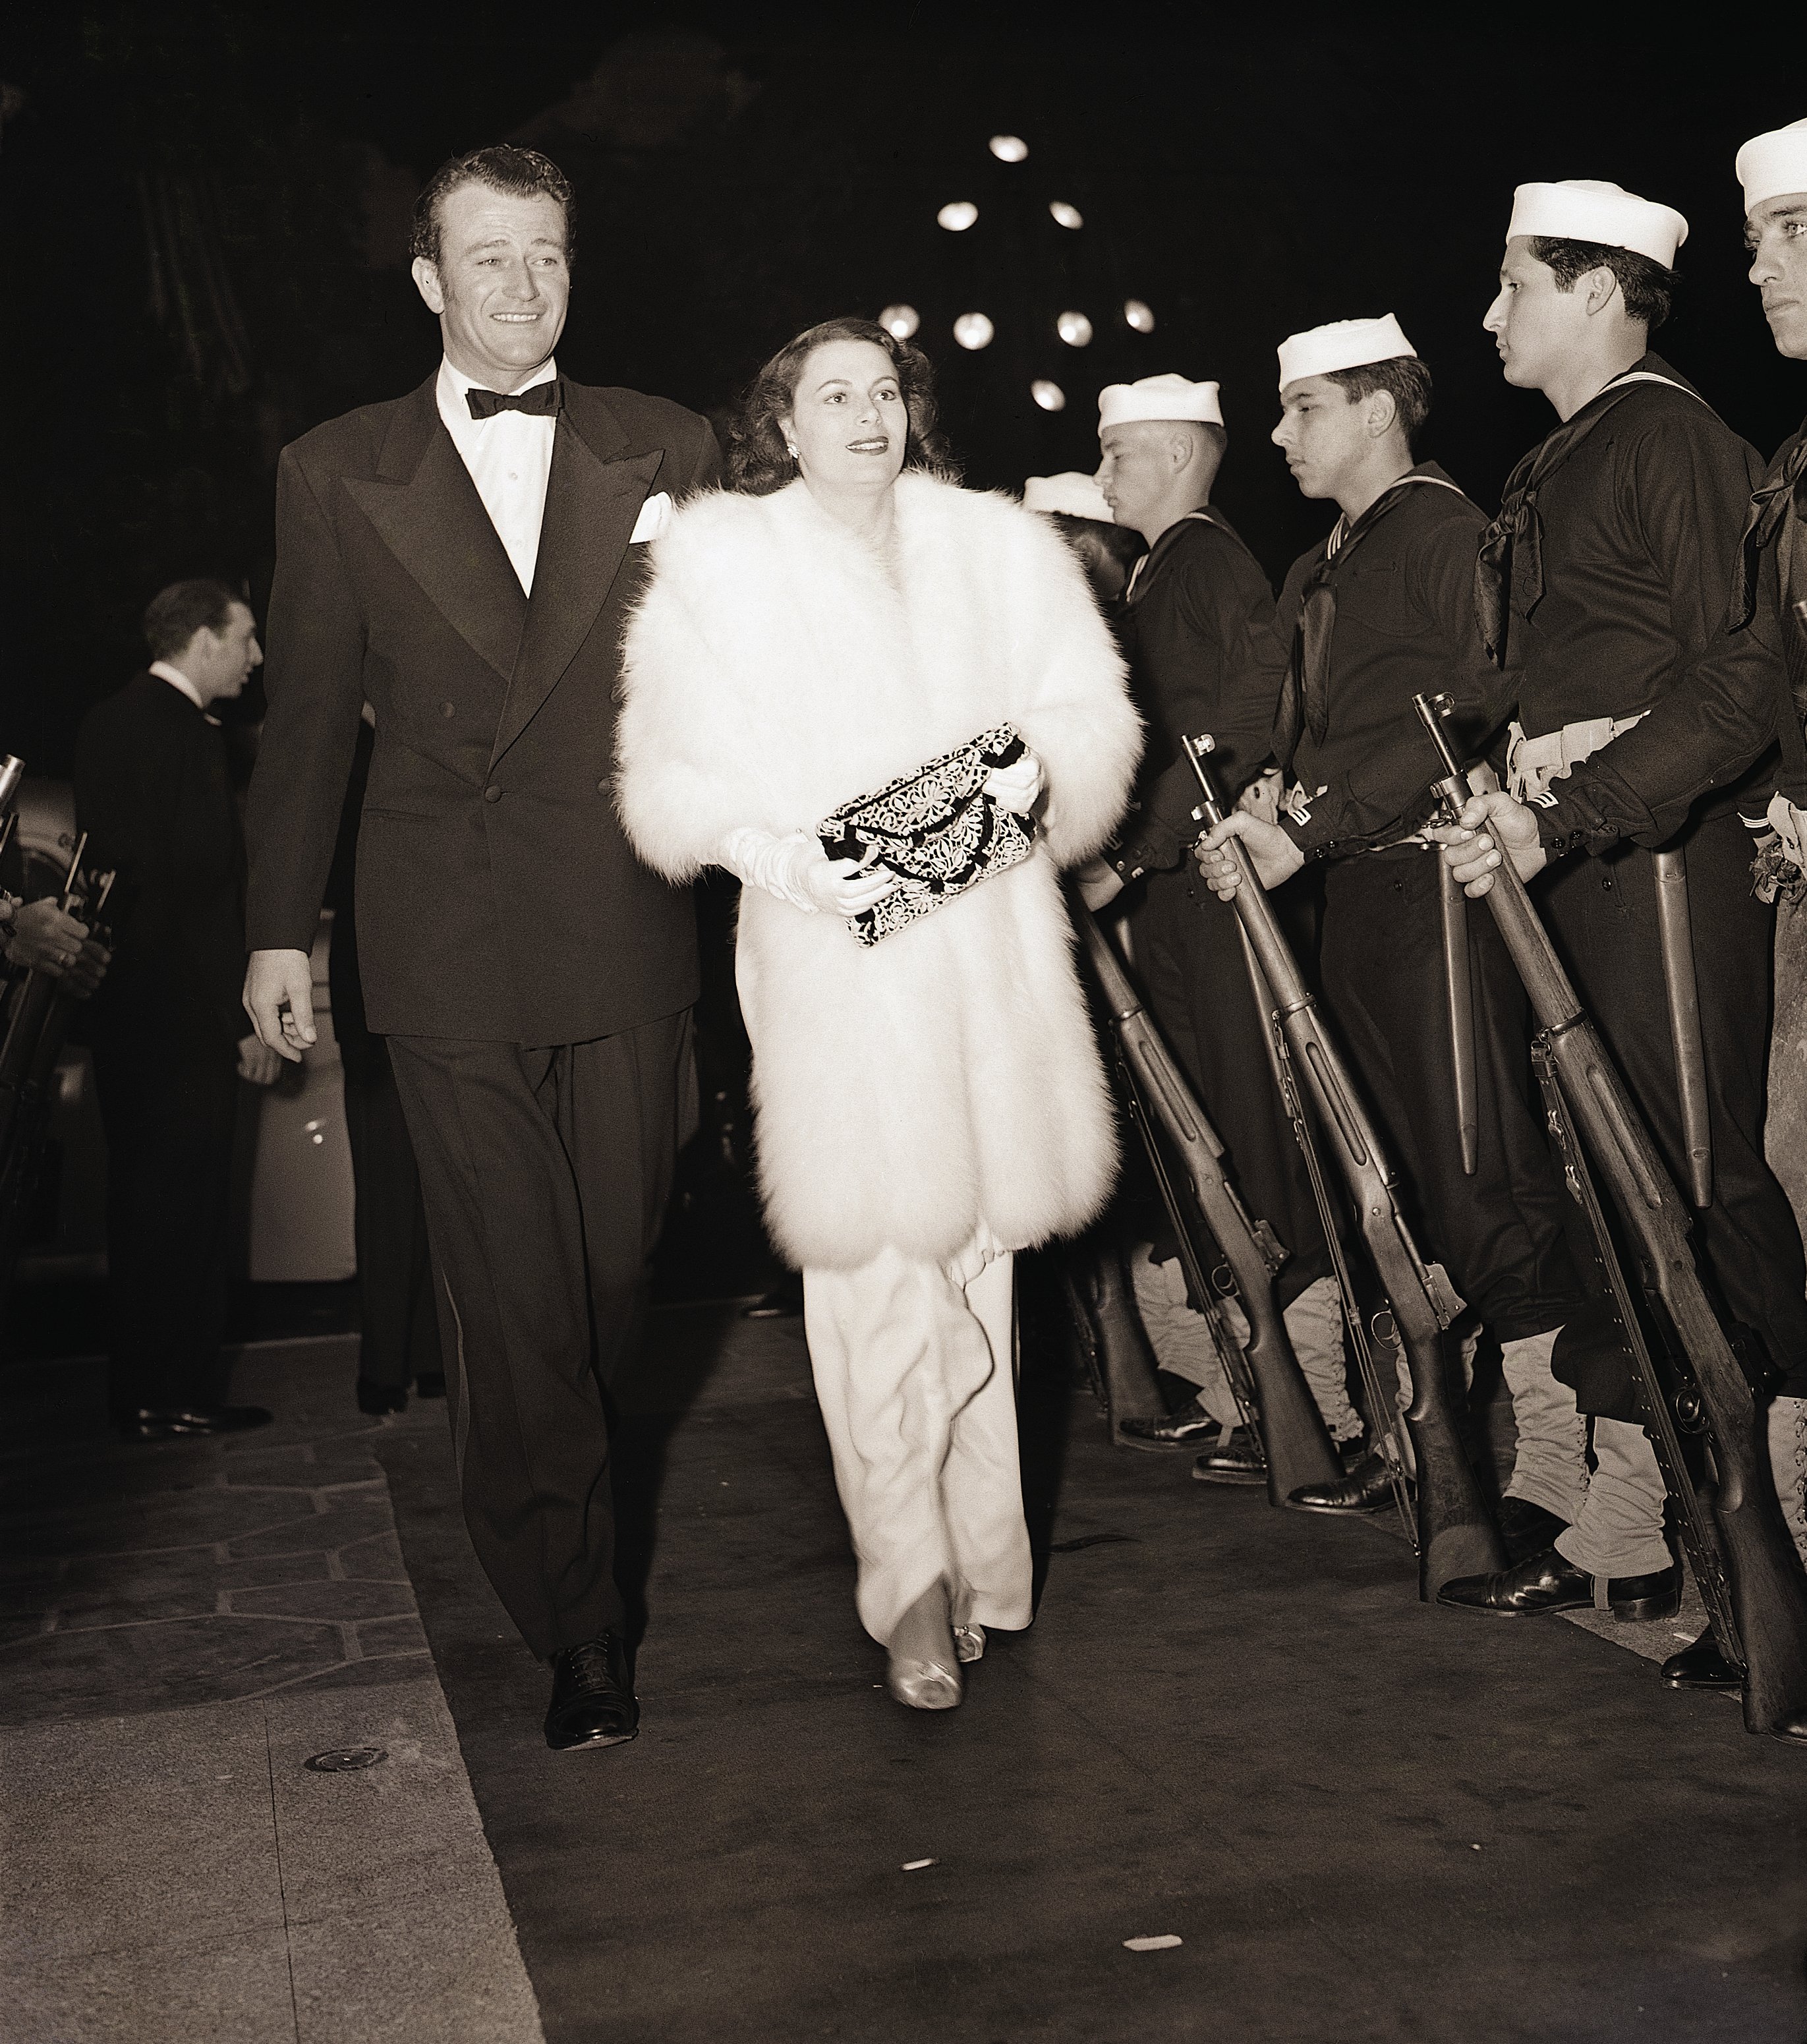 John Wayne is pictured with his wife Josephine on their arrival last night at the new Hollywood Theater for the grand premiere of Cecil B. DeMille's latest epic | Source: Getty Images